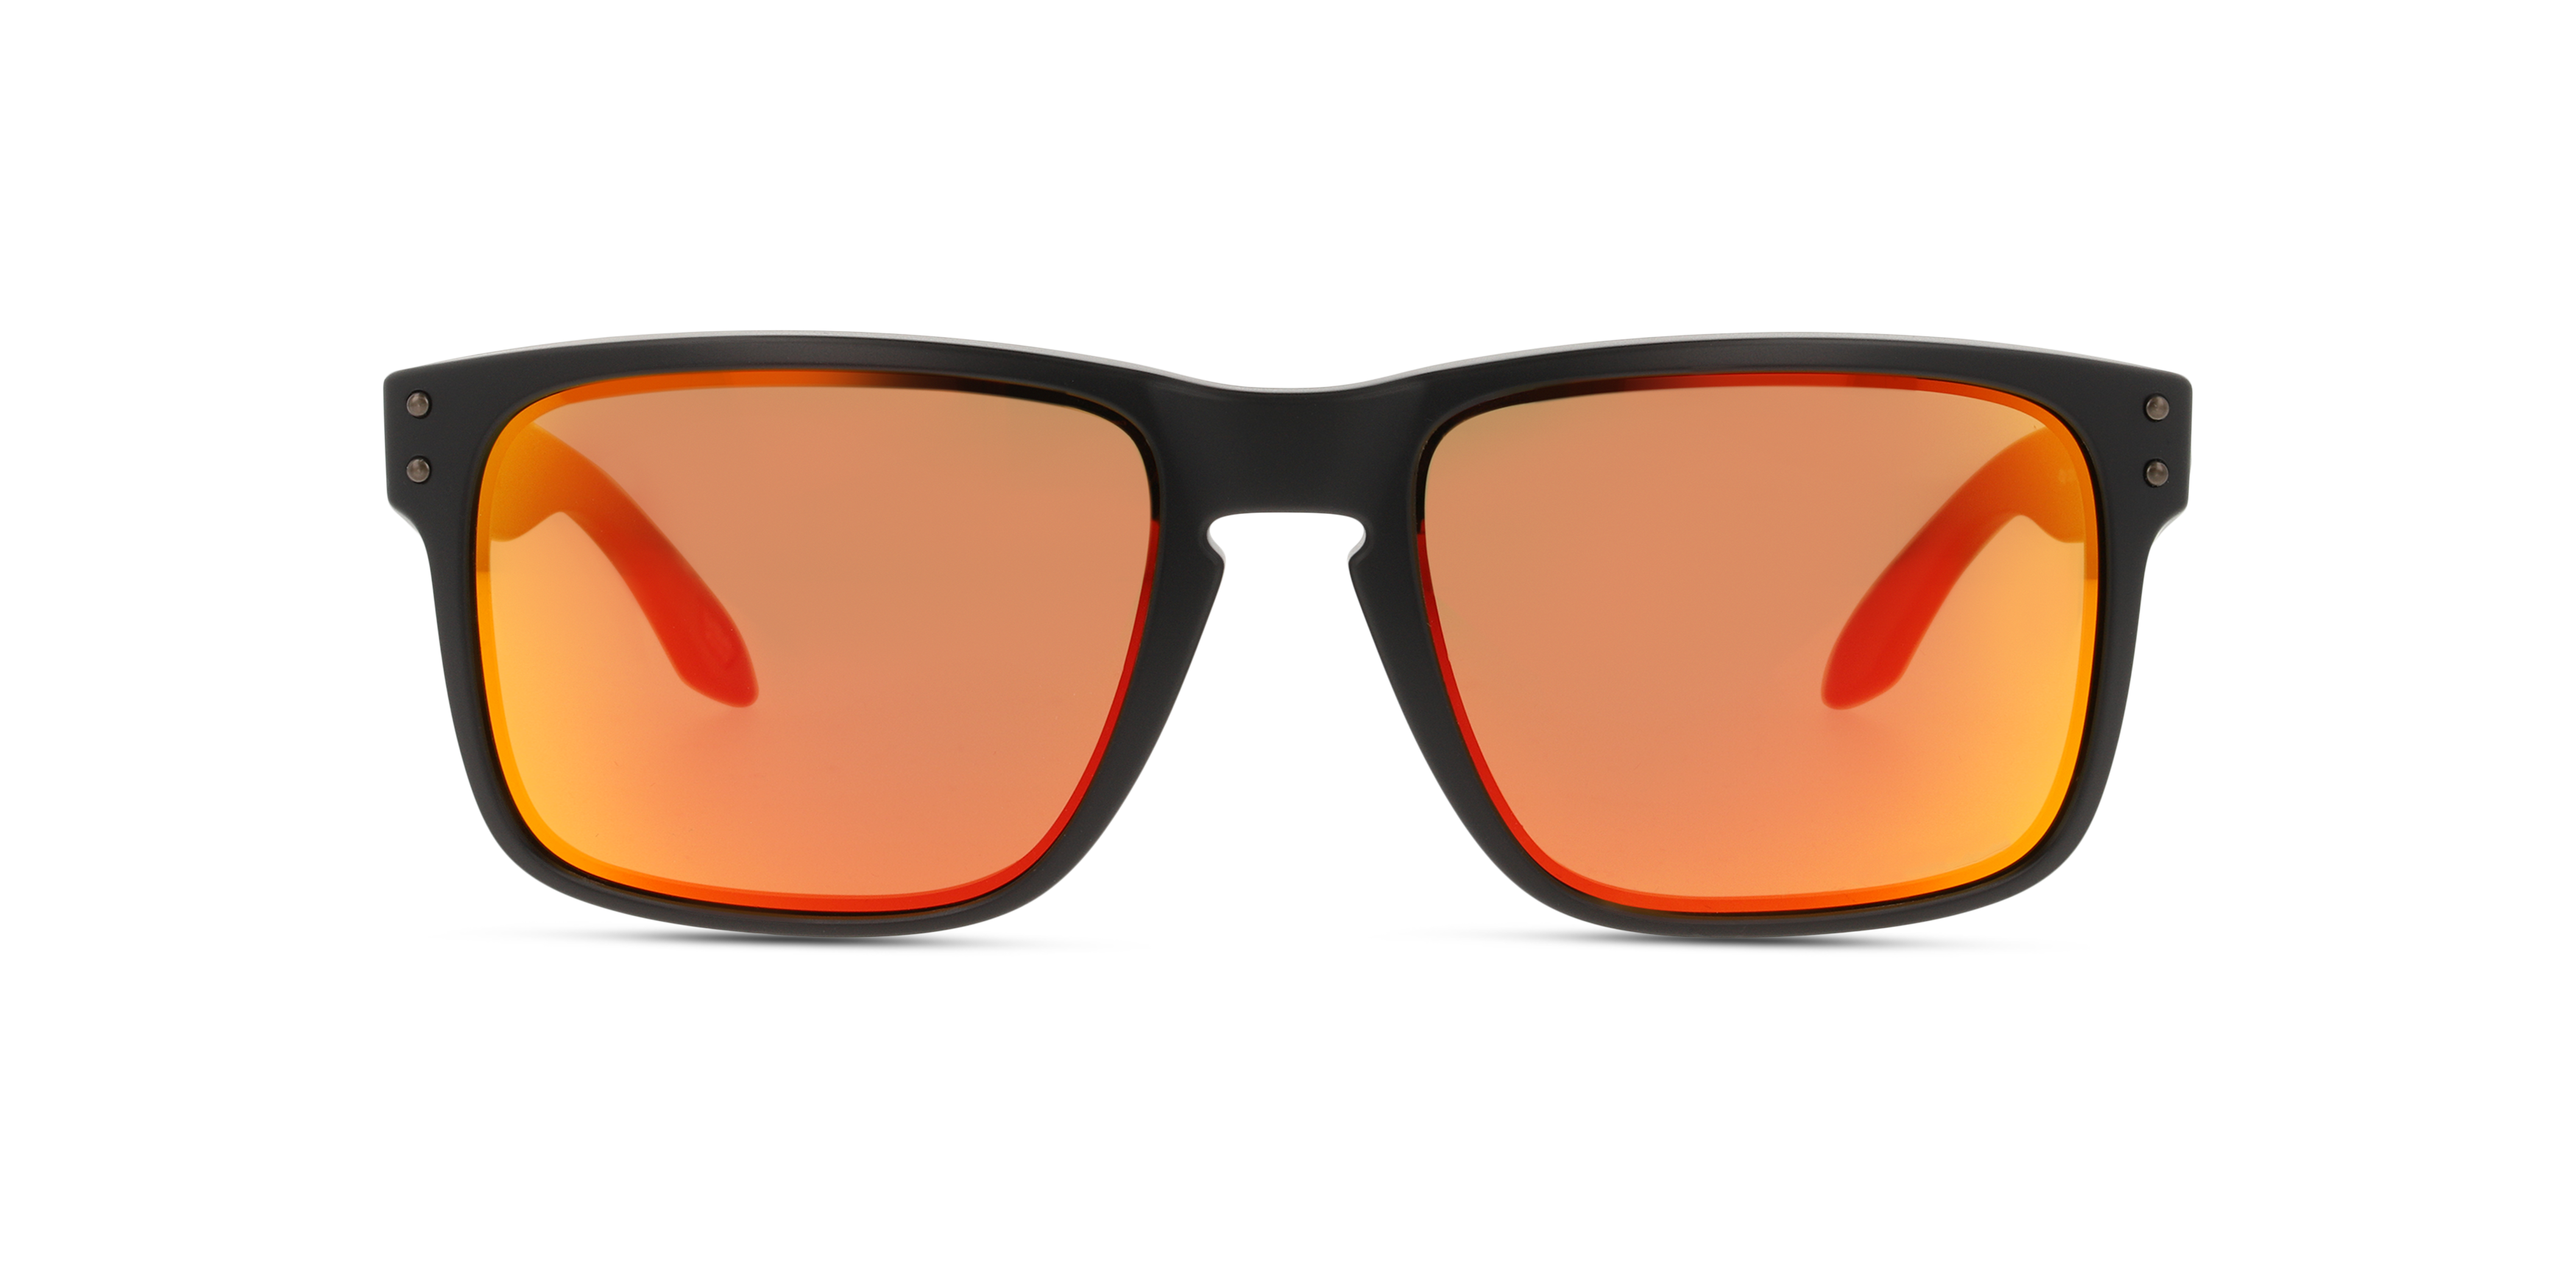 [products.image.front] Oakley Holbrook OO9102 9.1